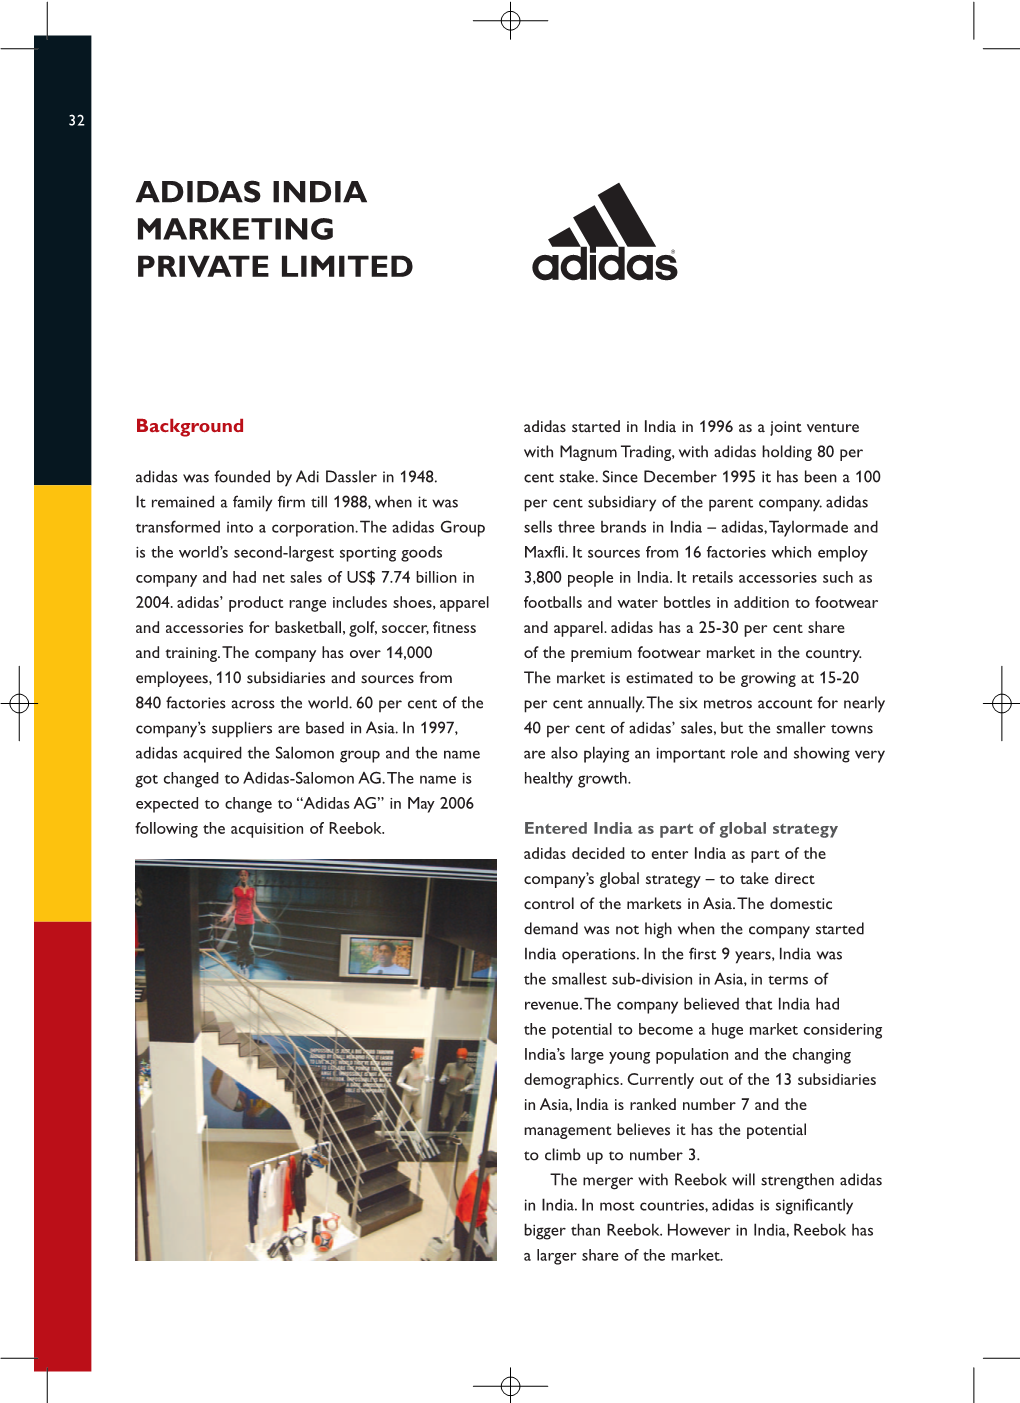 Adidas India Marketing Private Limited